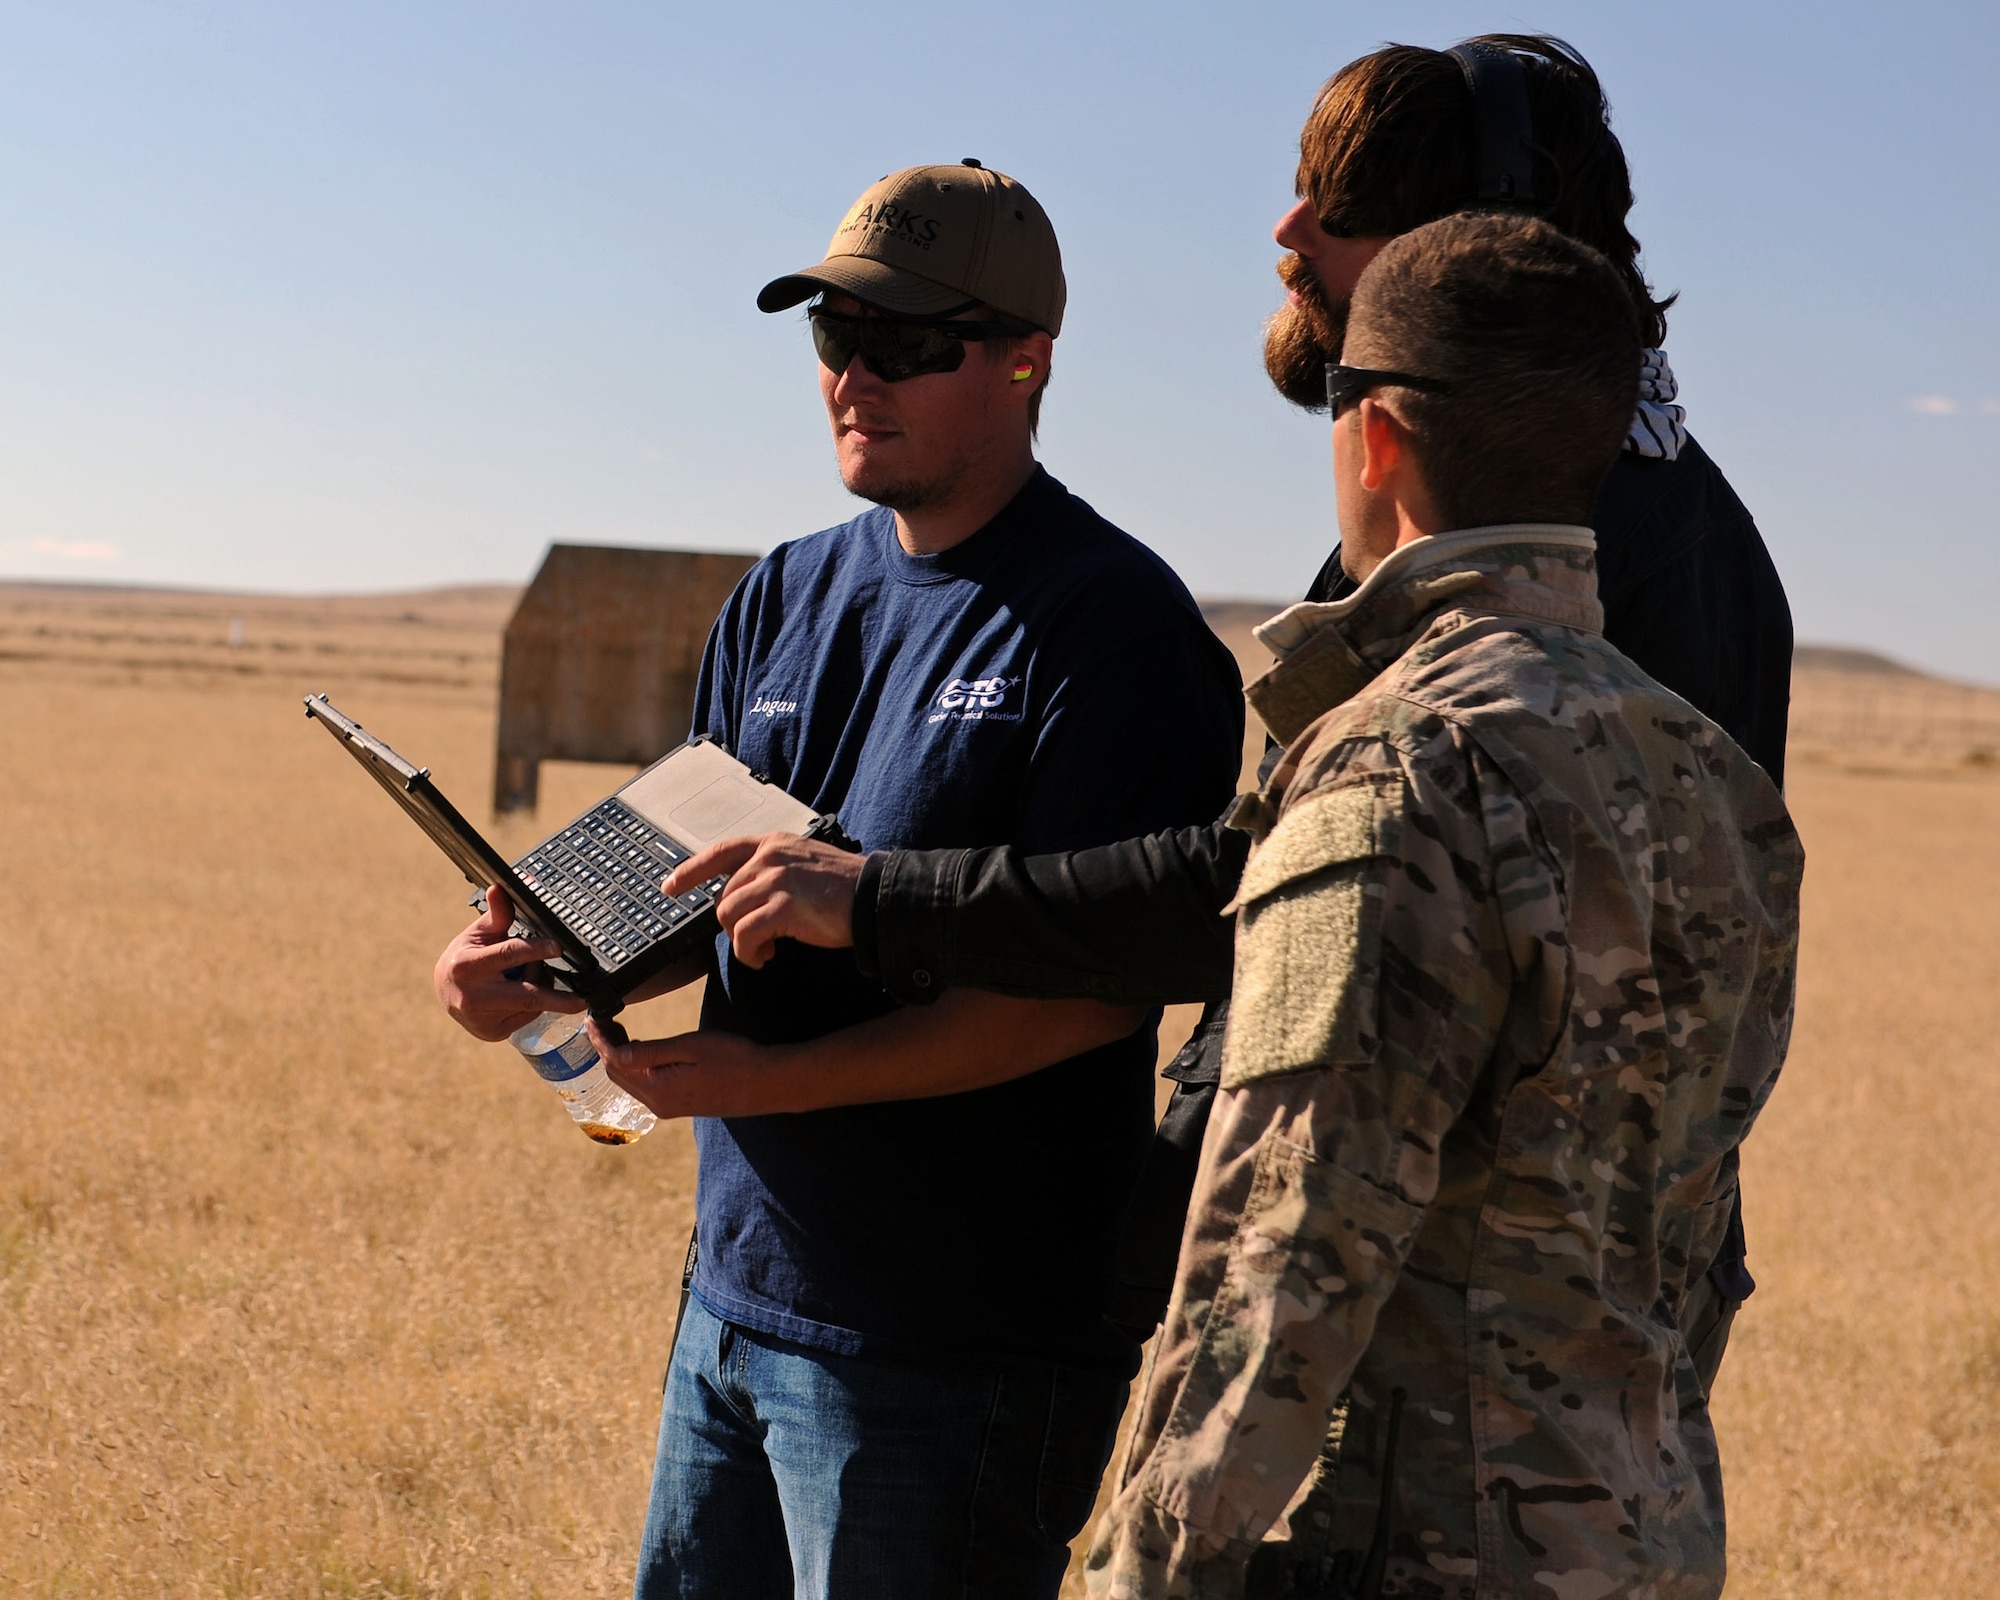 A member of the 27th Special Operations Civil Engineer Squadron Explosive Ordnance Disposal flight discusses training scenarios with members of the Robotic Human Type Targets team during live fire training Nov. 8, 2016, at Melrose Air Force Range, N.M. RHTT targets are autonomous and smart in nature, allowing for the creation of infinite realistic scenarios which call for Air Commandos to employ elevated tactical thought processes, and execute appropriate courses of action with real-time urgency. (U.S. Air Force photo by Staff Sgt. Whitney Amstutz/Released)